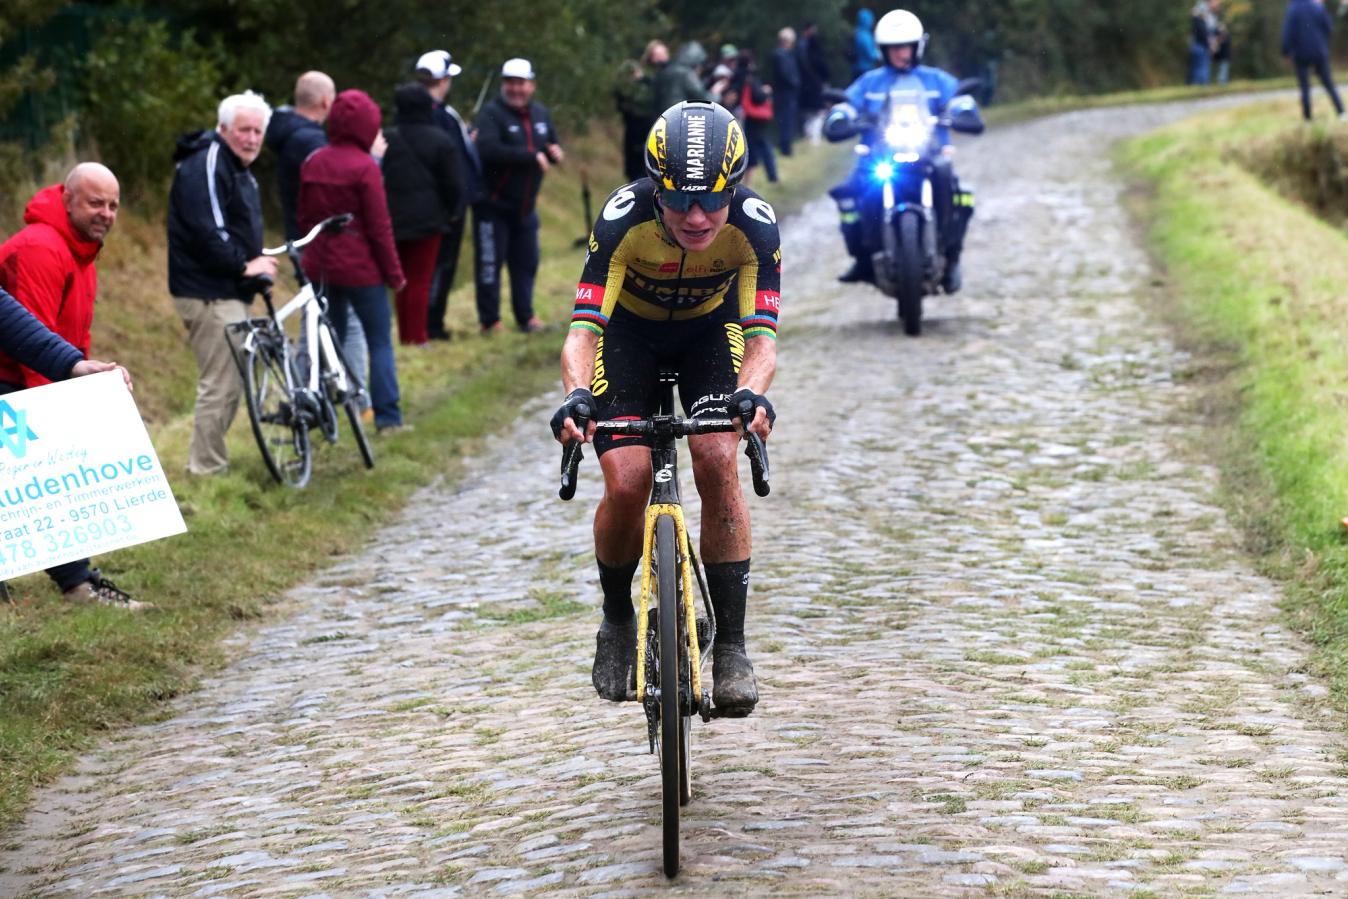 Like the men, the women are also tasked with conquering several of Northern France’s most unforgiving sectors of cobblestones, like Mons-en-Pévèle and Carrefour de l'Arbre.